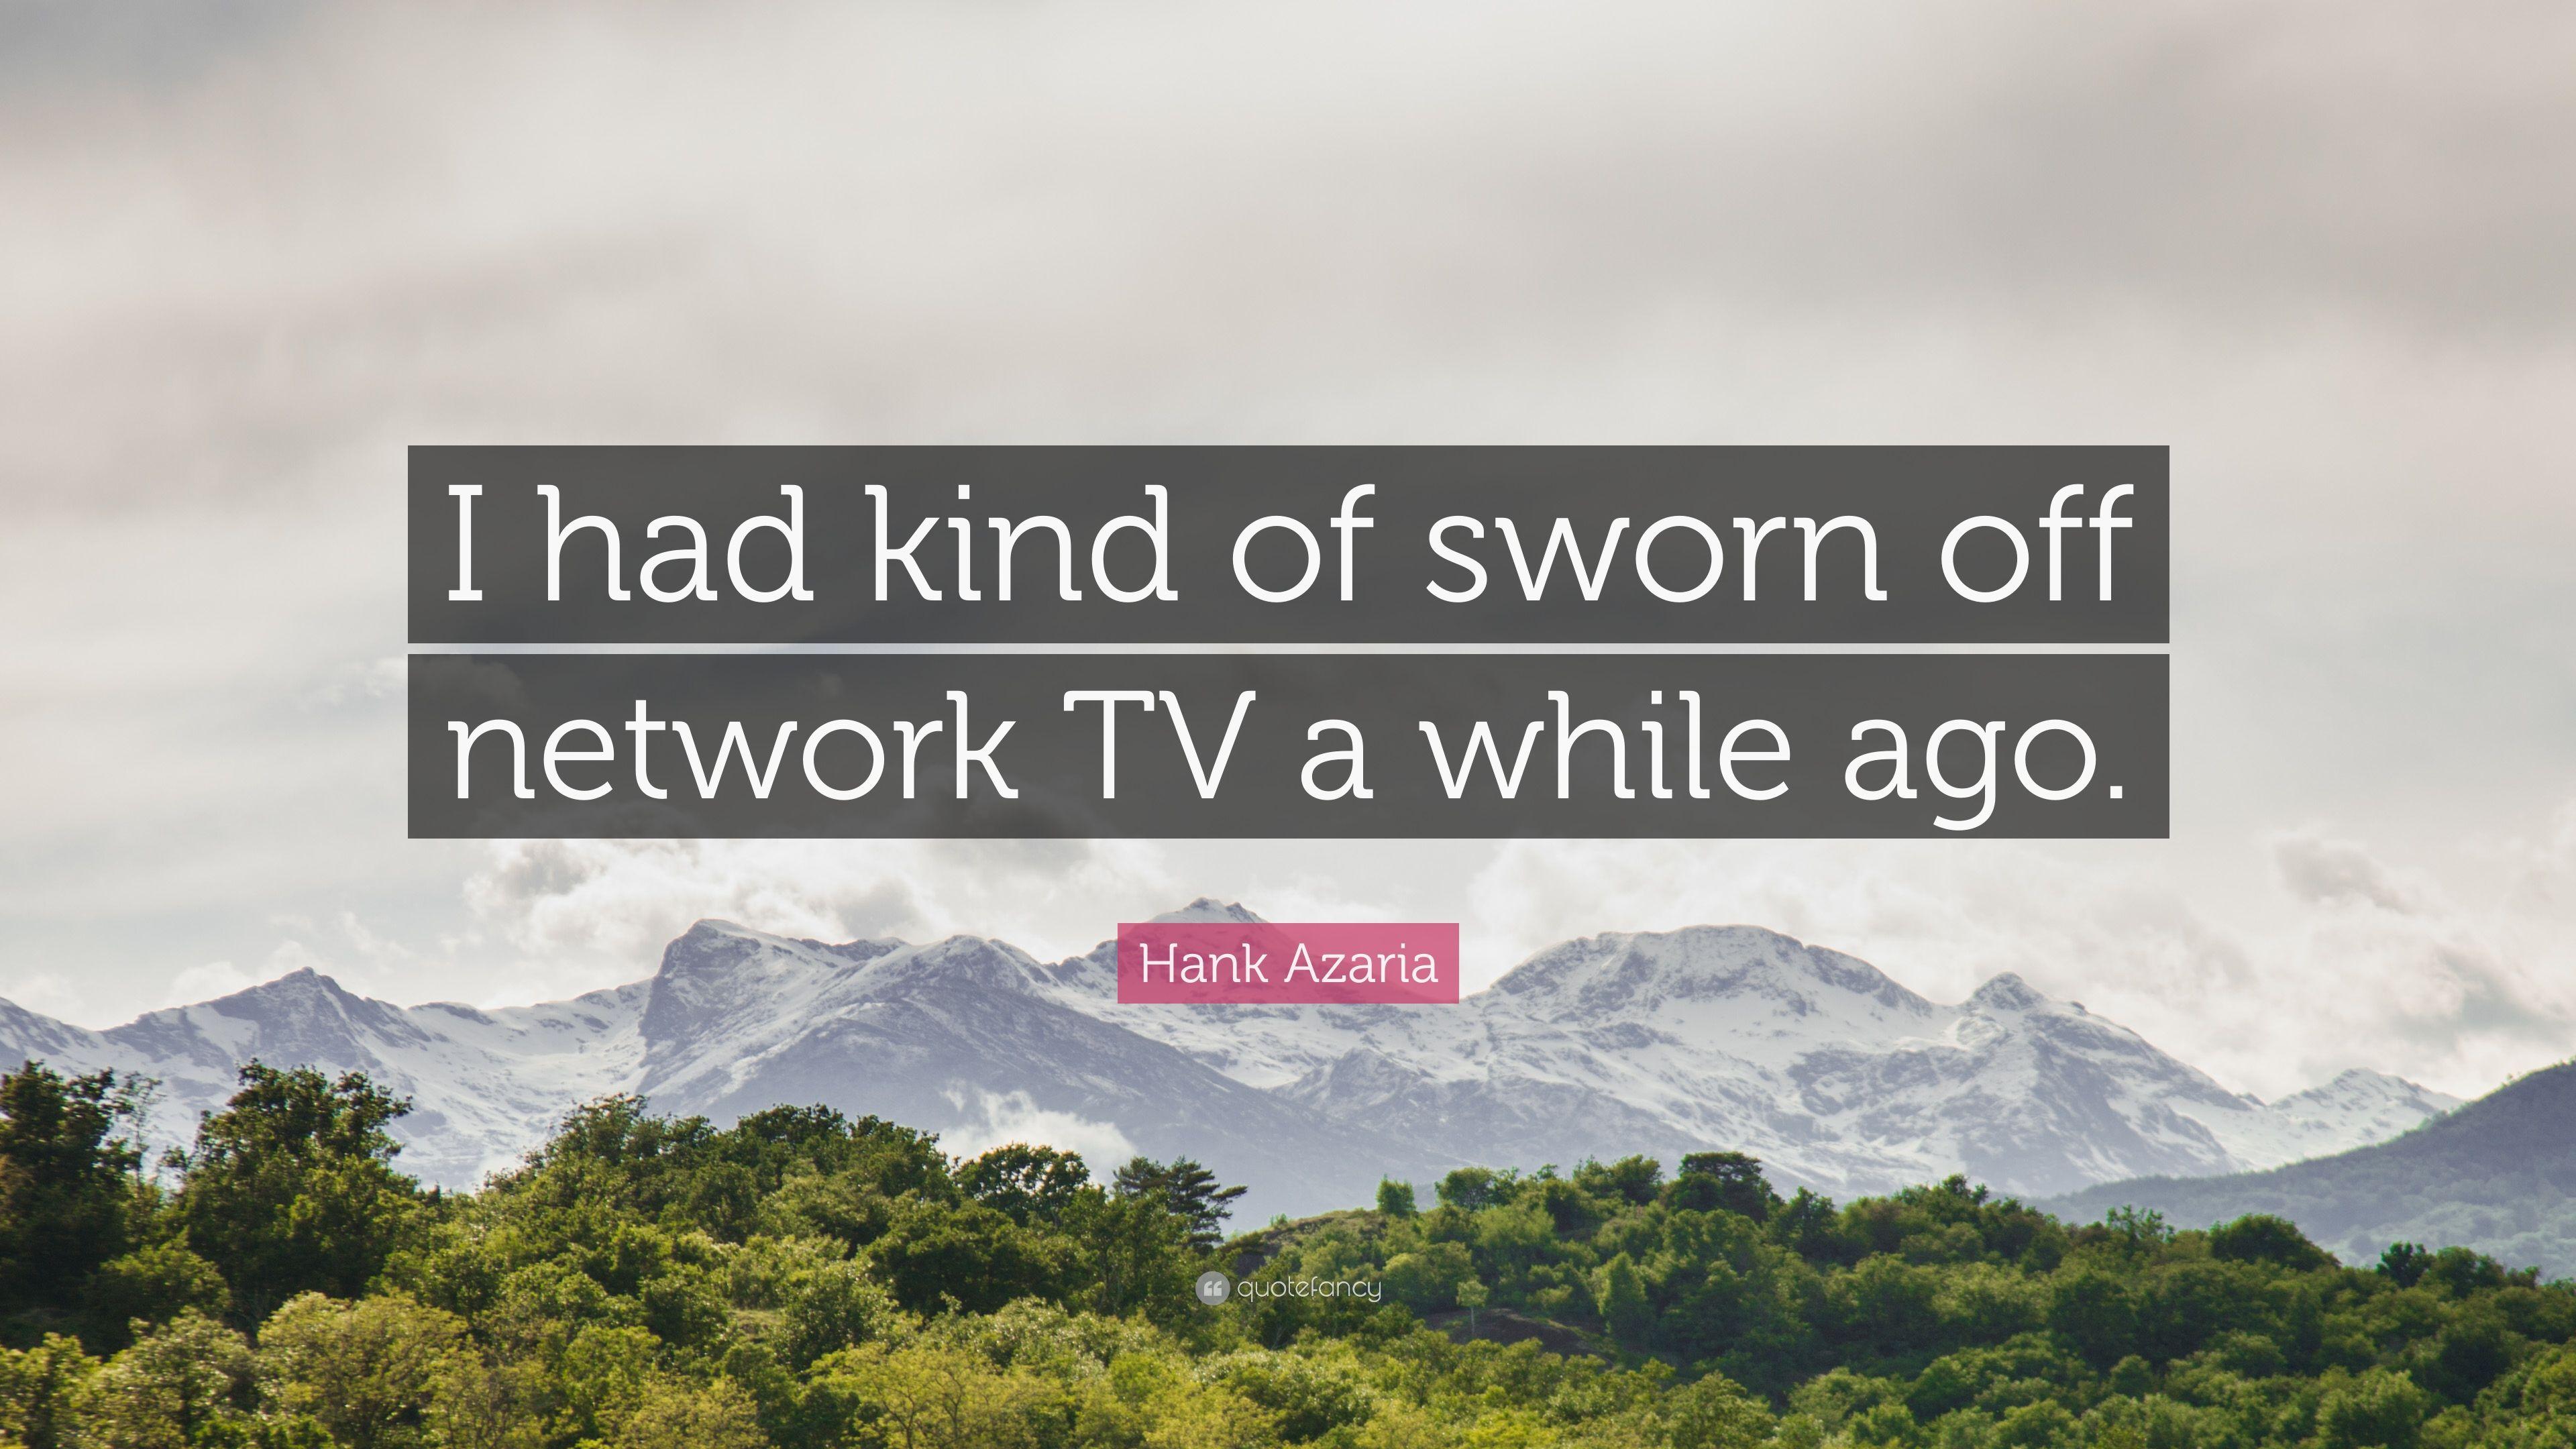 Hank Azaria Quote: “I had kind of sworn off network TV a while ago